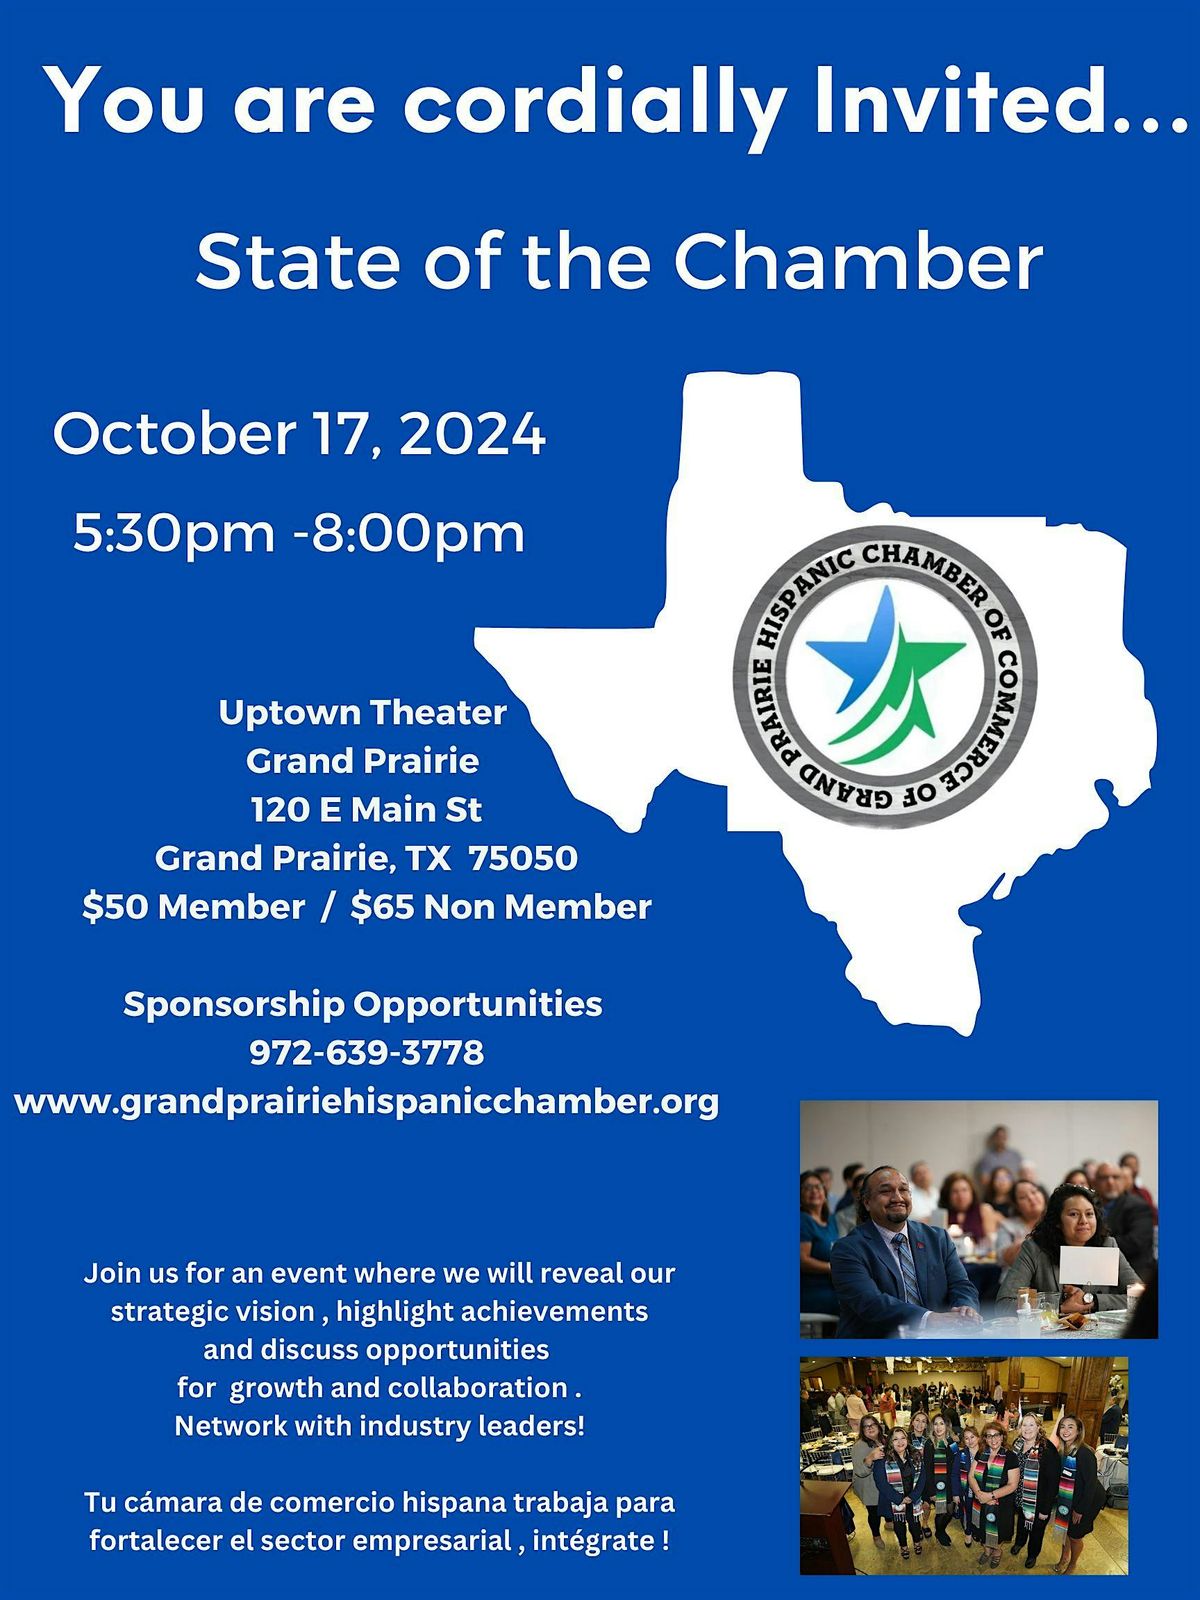 State of the Chamber Dinner